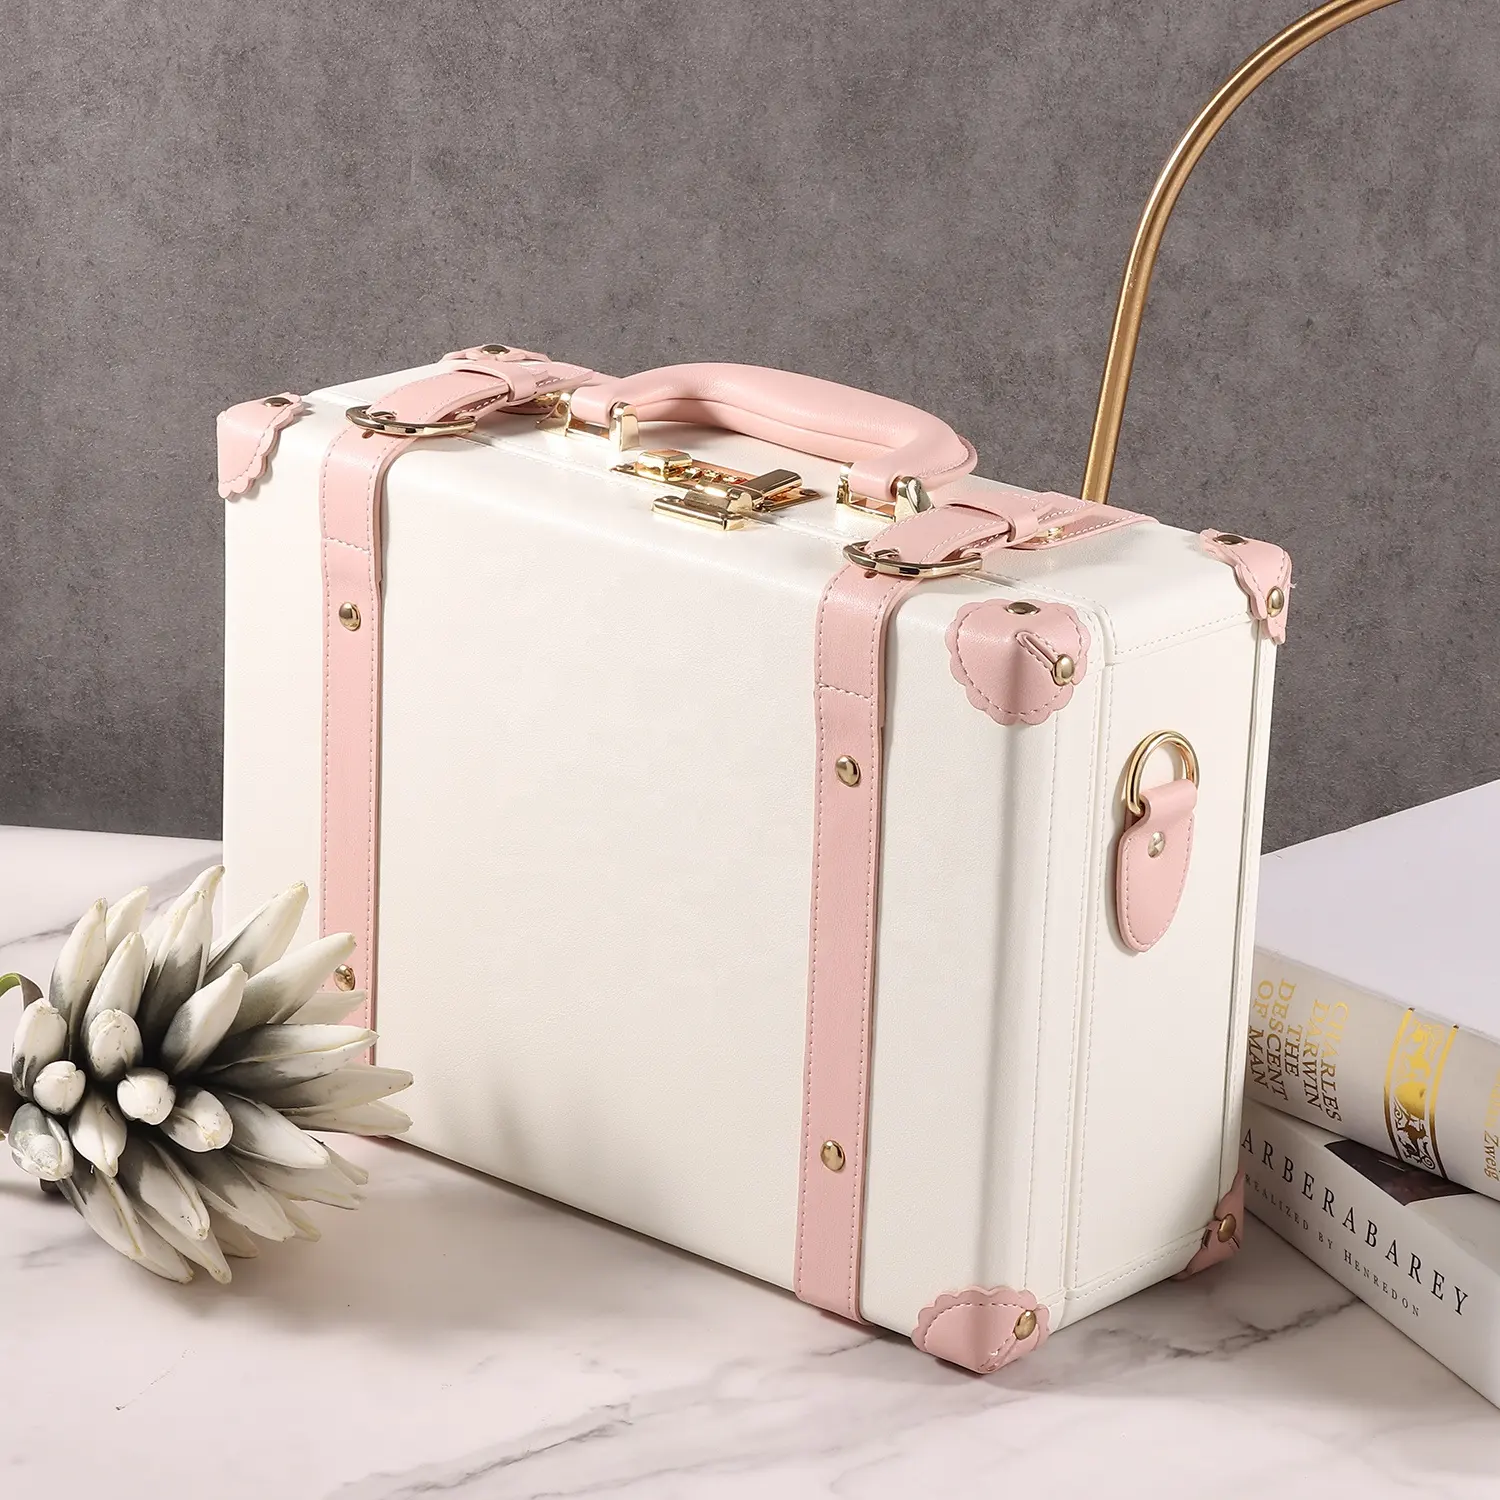 Unisex Mini Pink Travel Suitcase Sets PU Leather/PVC Luggage with Spinner Caster PC Material